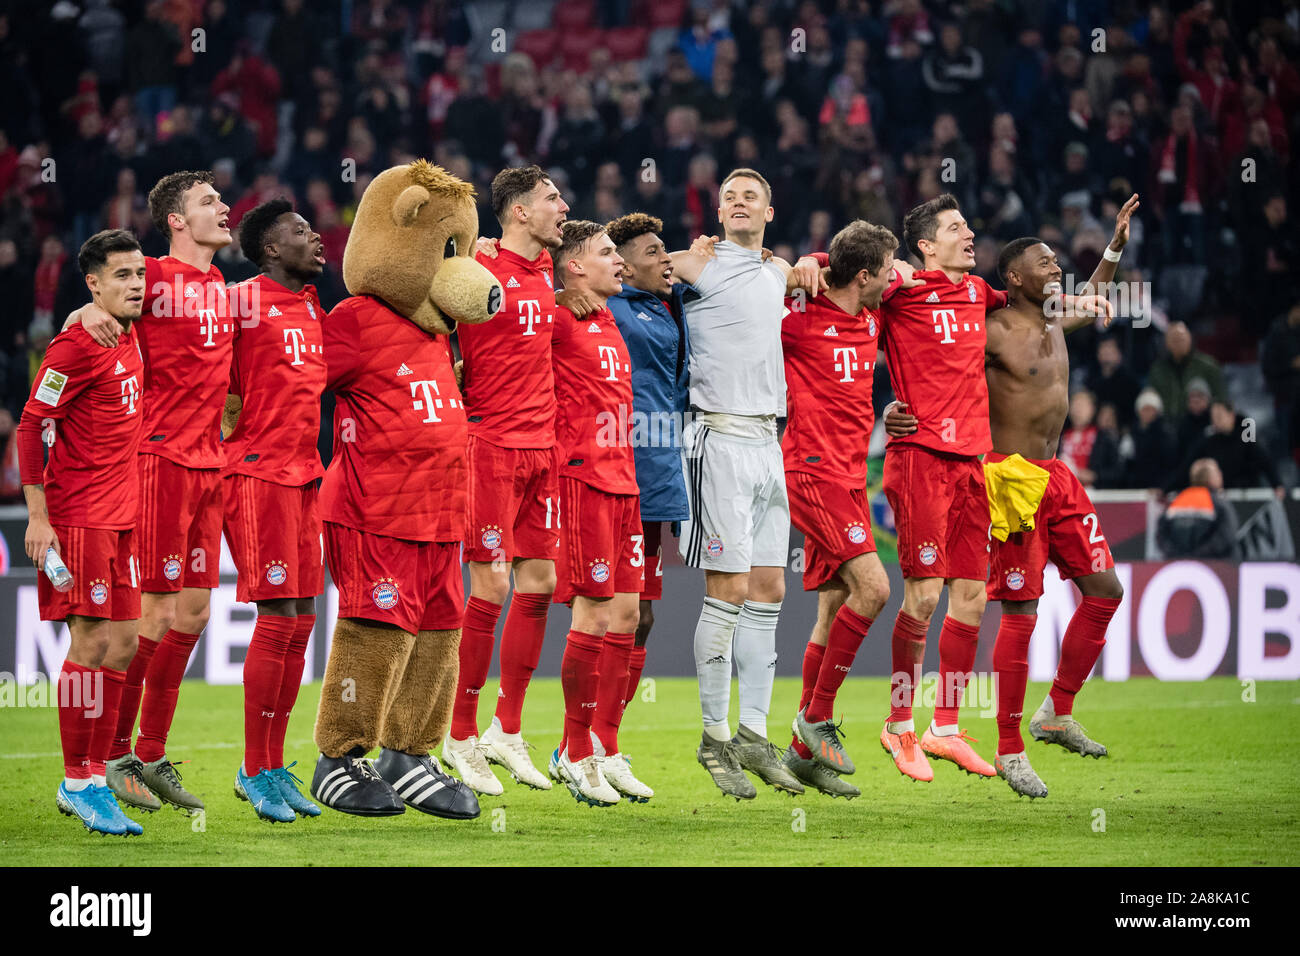 09 November 2019, Bavaria, Munich: Soccer: Bundesliga, Bayern Munich - Borussia Dortmund, 11th matchday in the Allianz Arena. The FC Bayern Munich players celebrate their victory with the fans after the match. Philippe Coutinho (l-r), Benjamin Pavard, Alphonso Davies, mascot Berni, Leon Goretzka, Joshua Kimmich, Kingsley Coman, goalkeeper Manuel Neuer, Robert Lewandowski, David Alaba and Thomas Müller. Photo: Matthias Balk/dpa - IMPORTANT NOTE: In accordance with the requirements of the DFL Deutsche Fußball Liga or the DFB Deutscher Fußball-Bund, it is prohibited to use or have used photograph Stock Photo